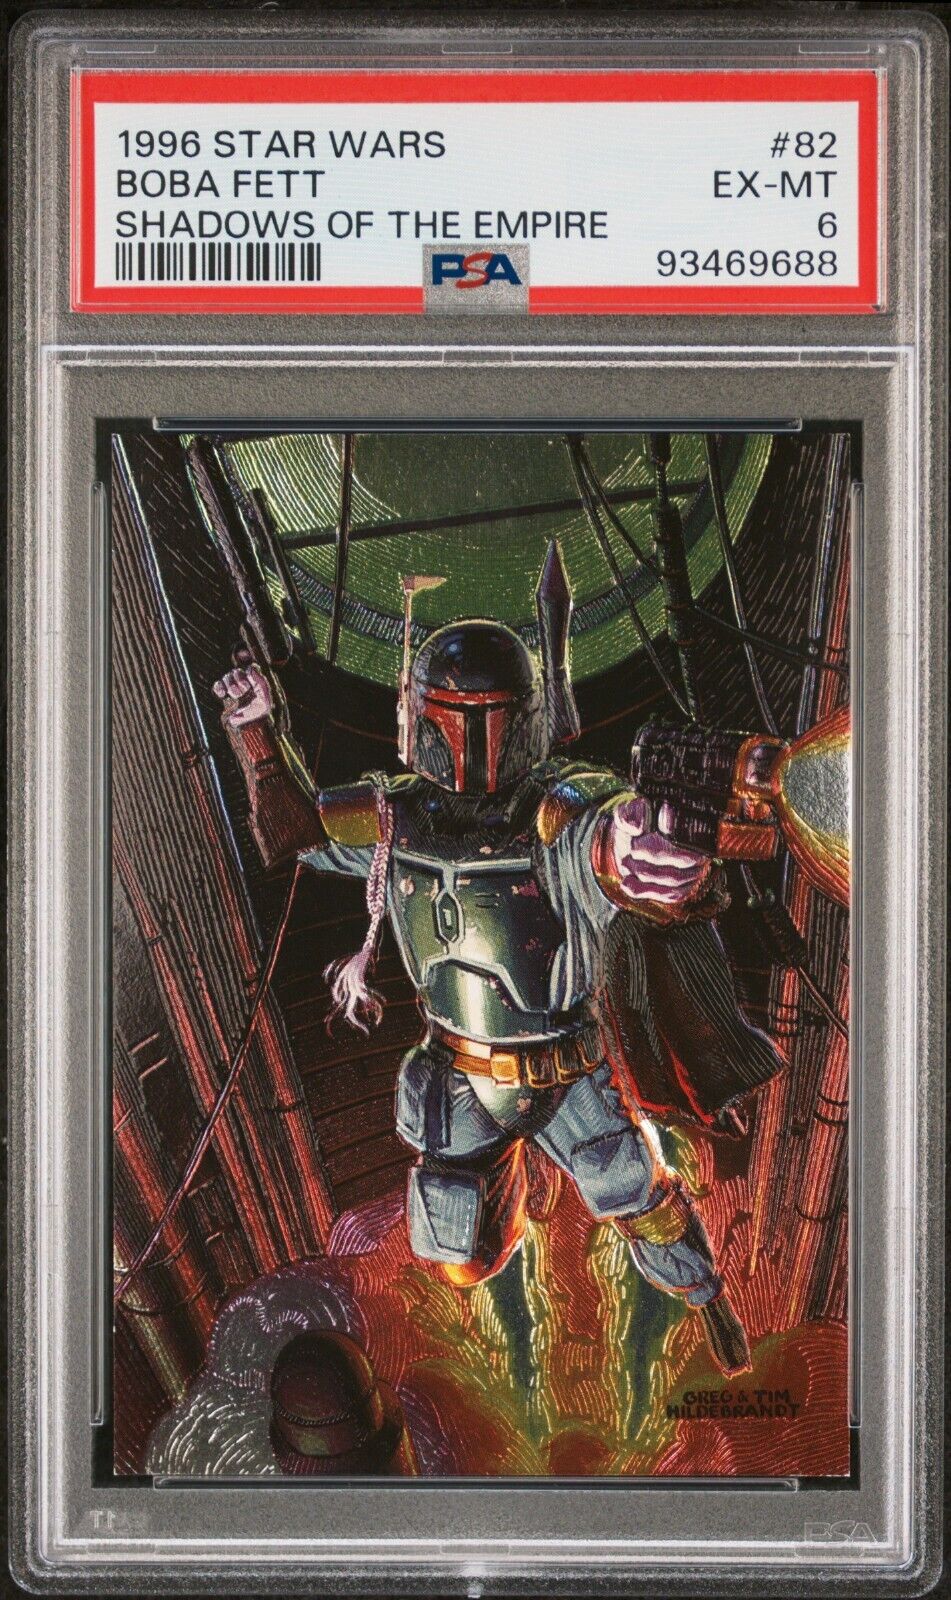 1996 Star Wars Shadows of the Empire Boba Fett Etched Foil #82 PSA 6 93469688